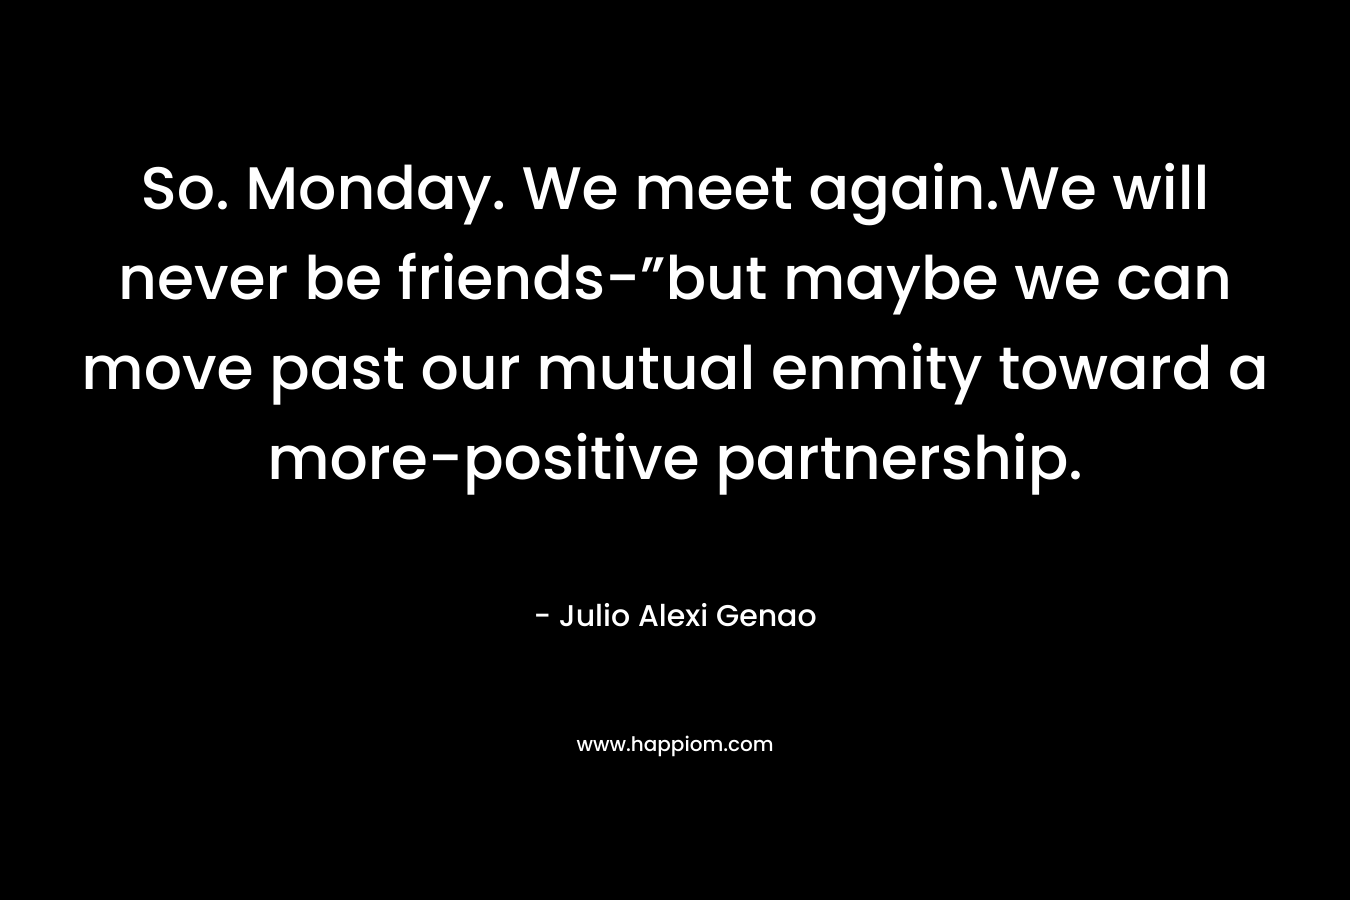 So. Monday. We meet again.We will never be friends-”but maybe we can move past our mutual enmity toward a more-positive partnership. – Julio Alexi Genao